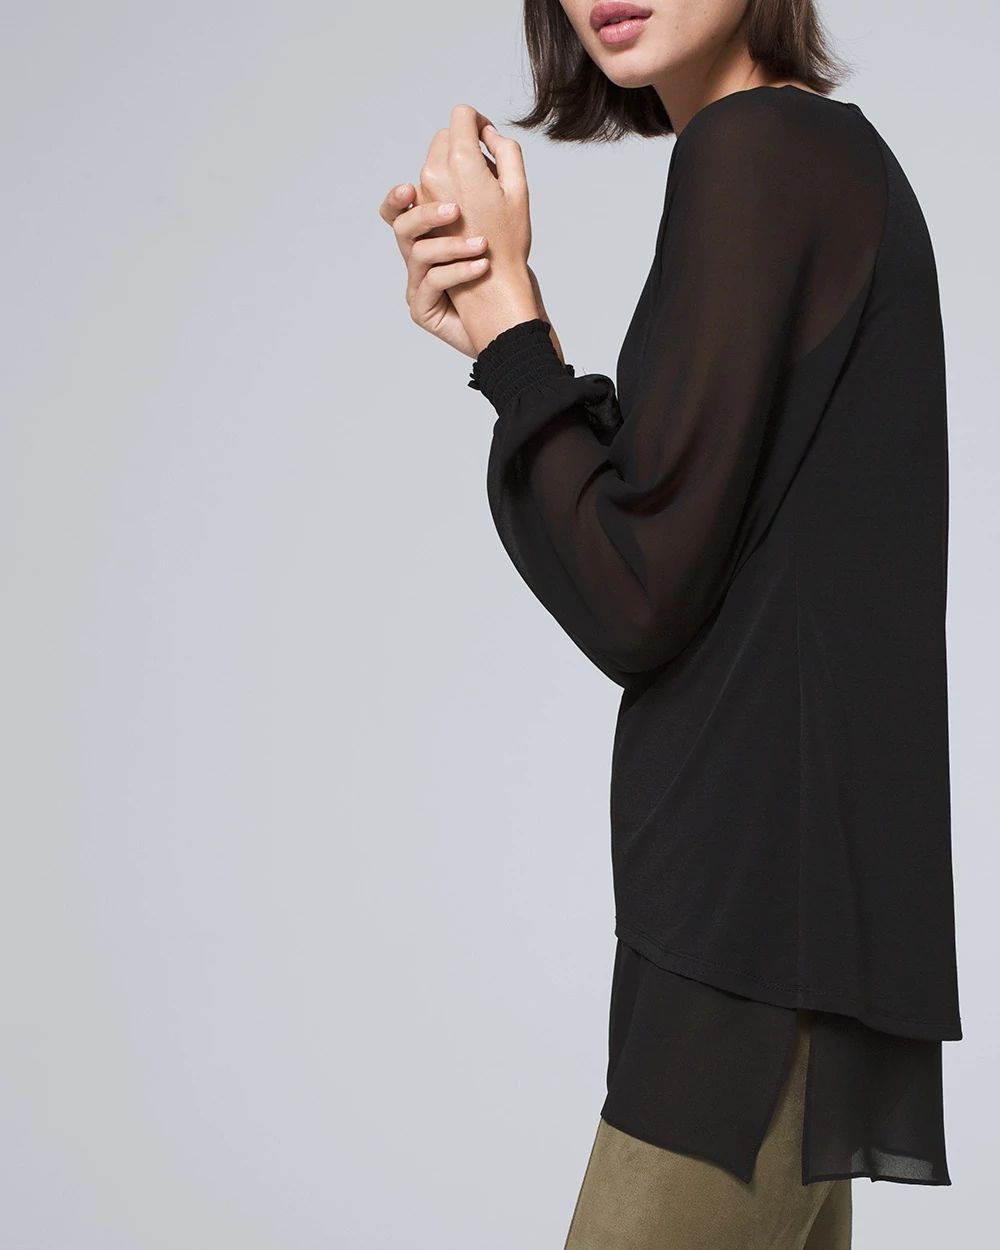 Blouson-Sleeve Woven Knit Tunic click to view larger image.